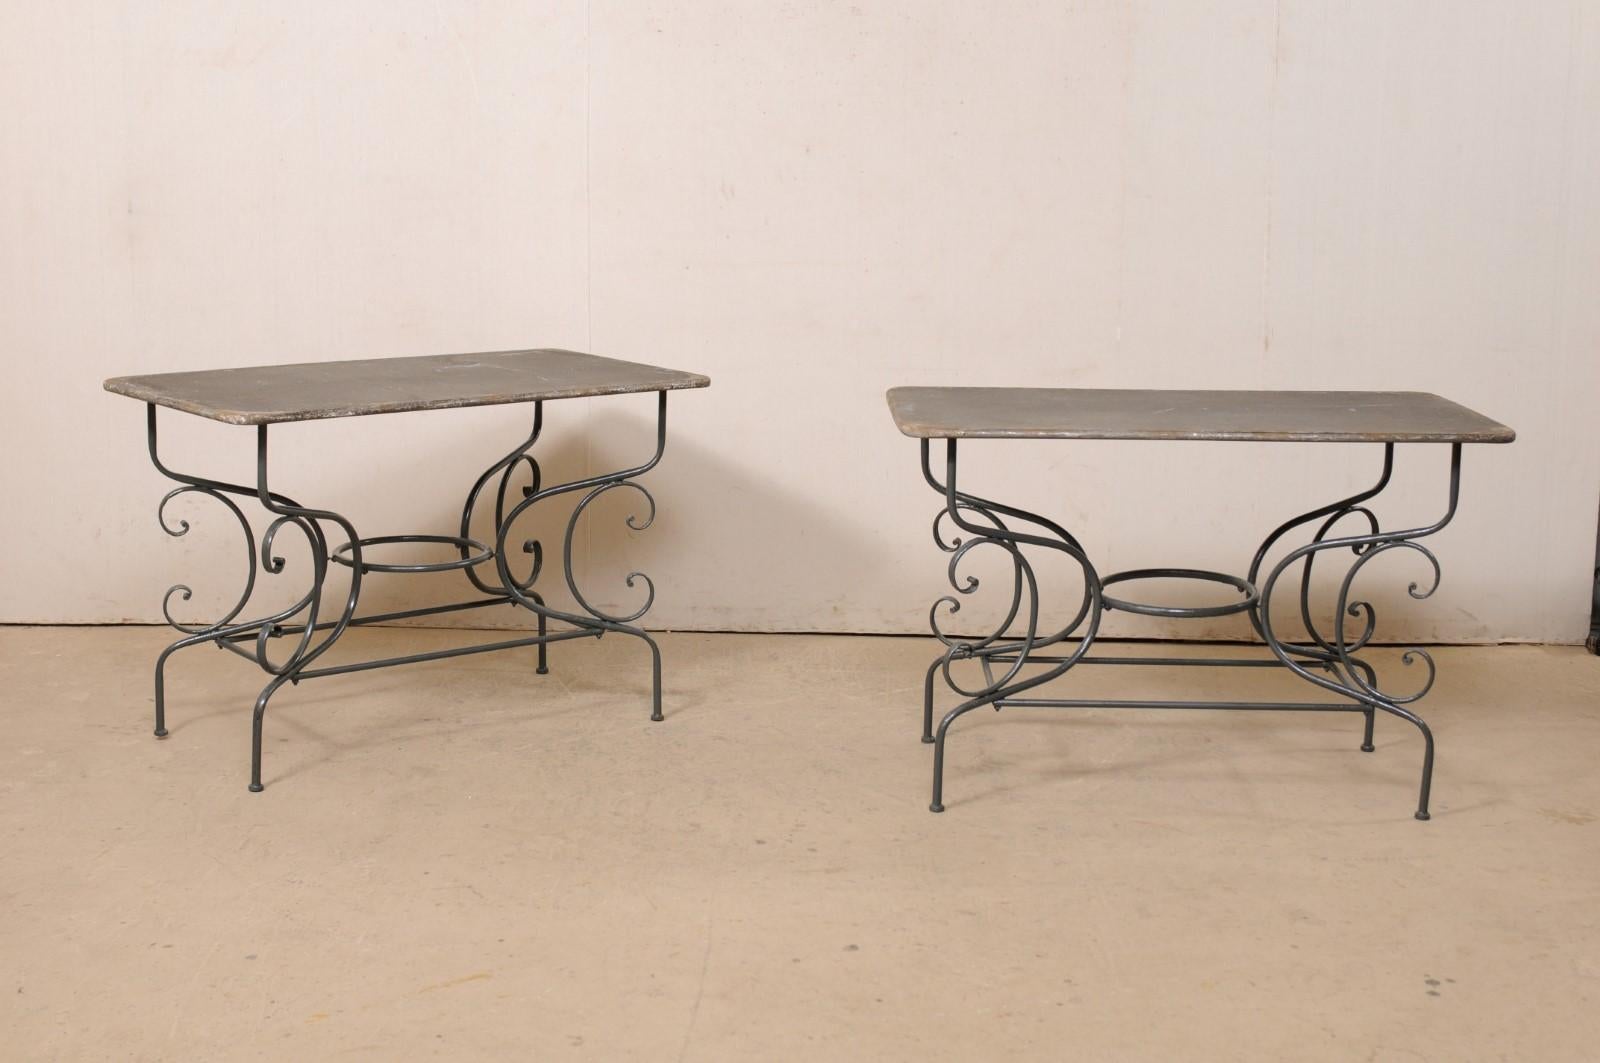 A French pair of metal occasional tables from the mid 20th century. This vintage pair of tables from France each feature textured, rectangular-shaped tops with rounded corners, which are raised upon four curvy metal legs, with large c-scroll